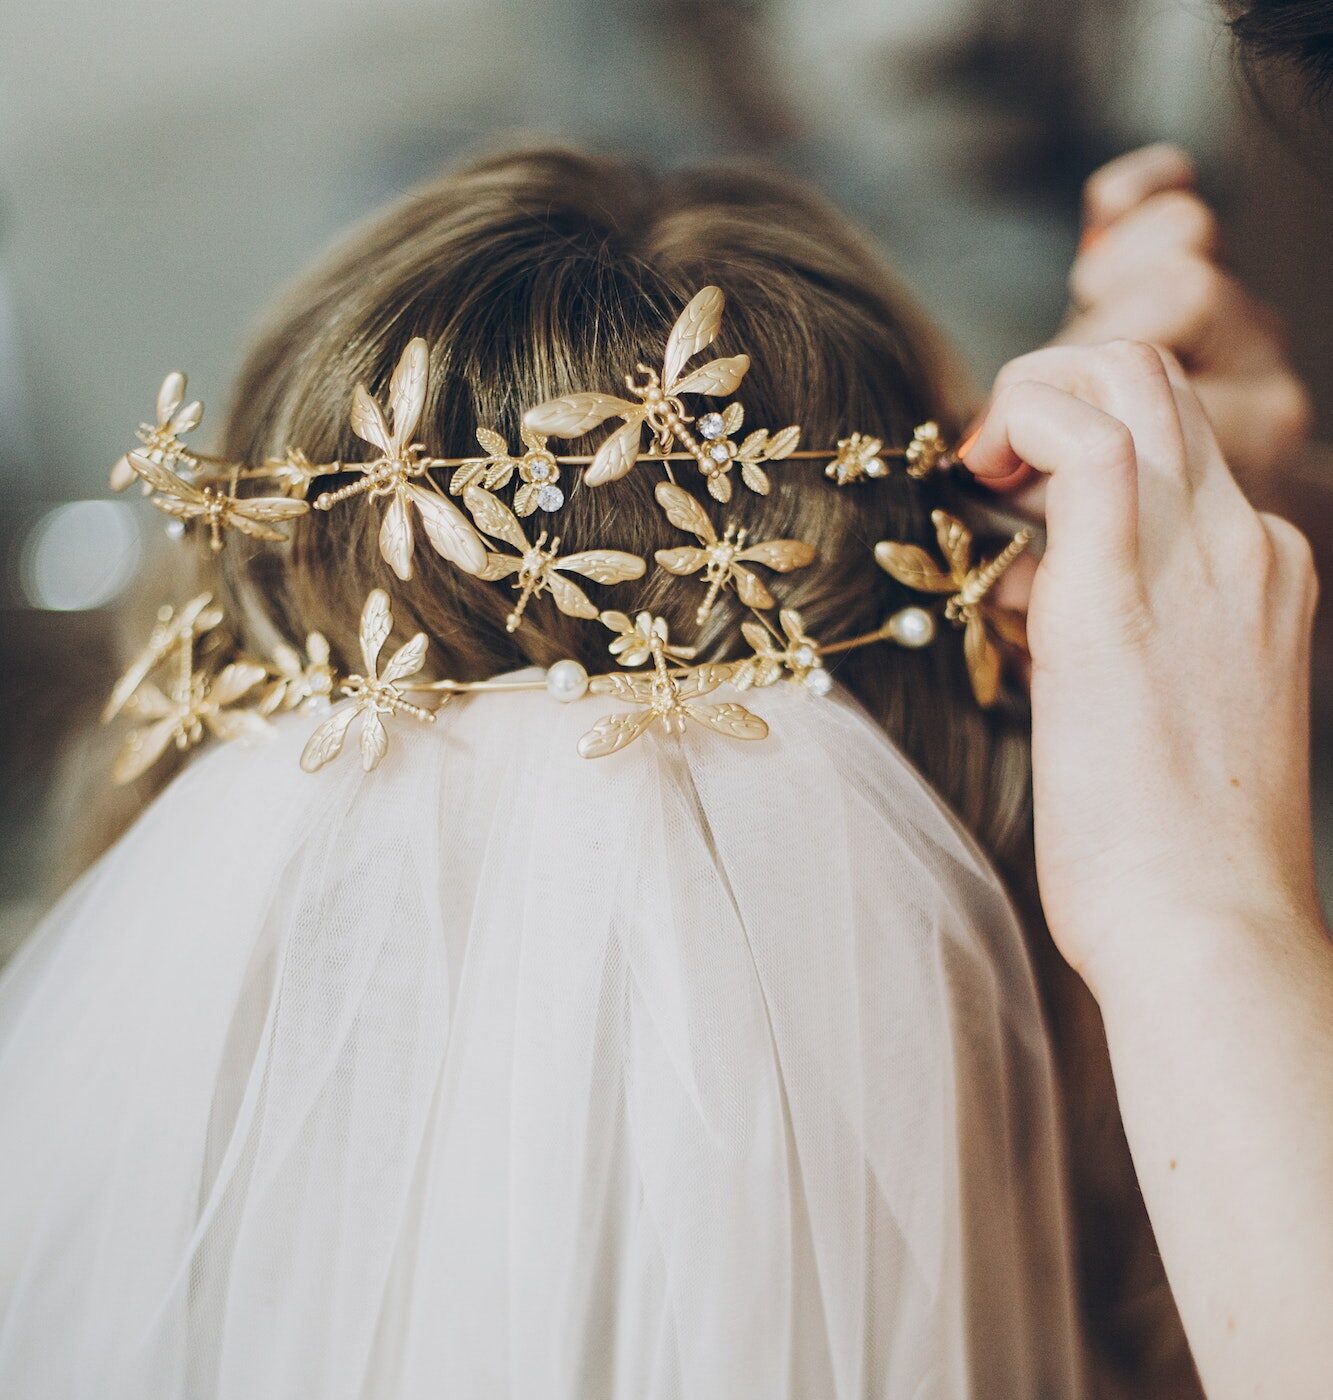 Hair stylish putting on stylish bride golden tiara with butterflies